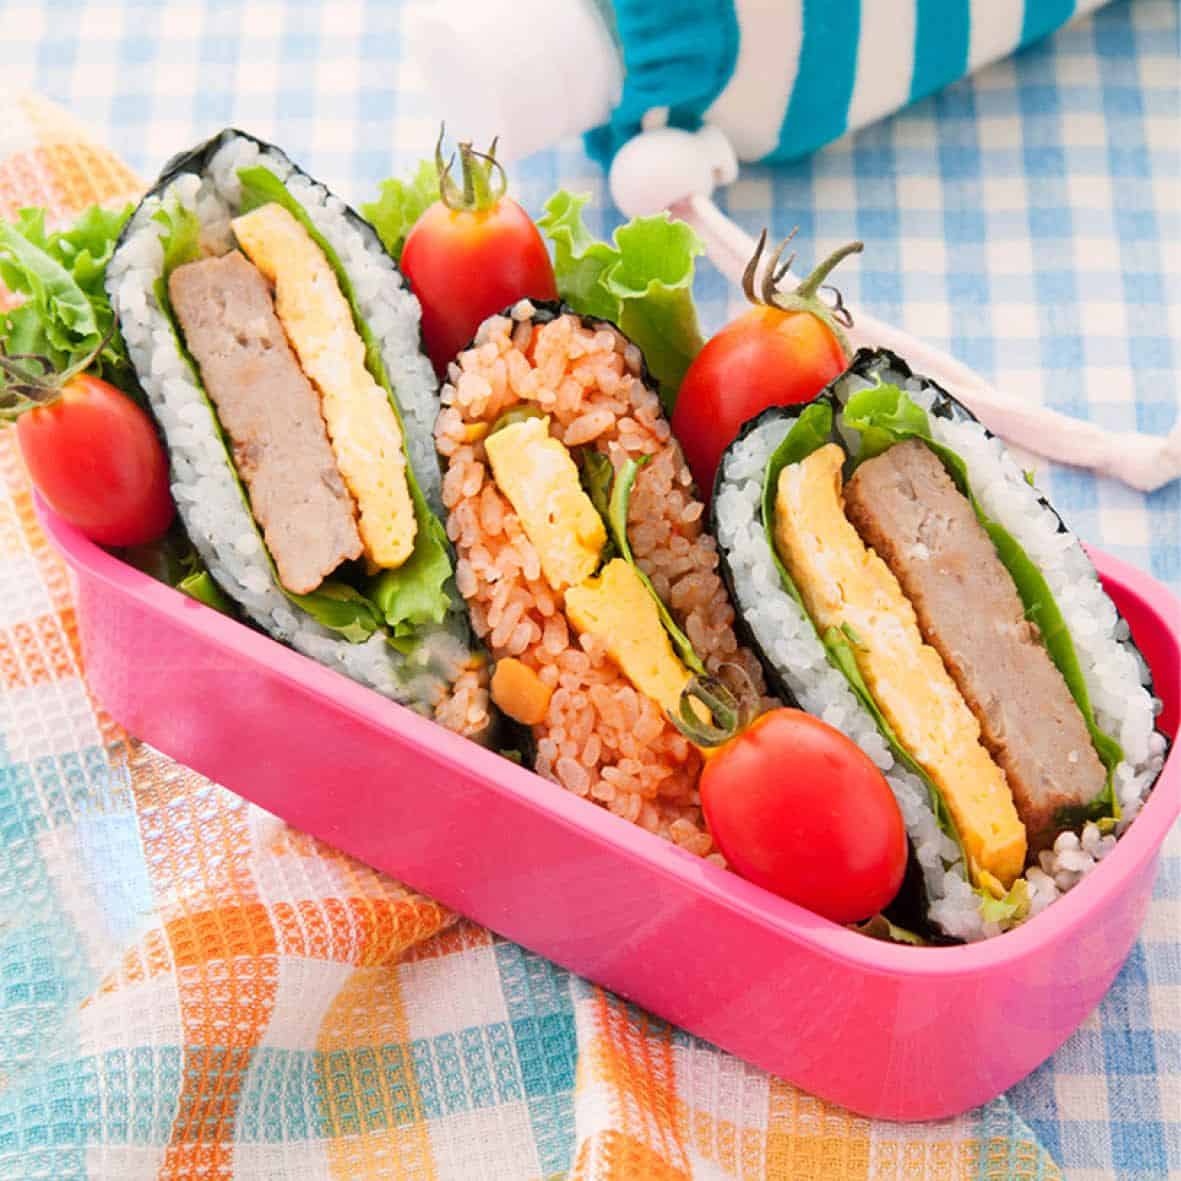 Sandwich Sushi Bento Box Lunch with Recipes - Go Dairy Free